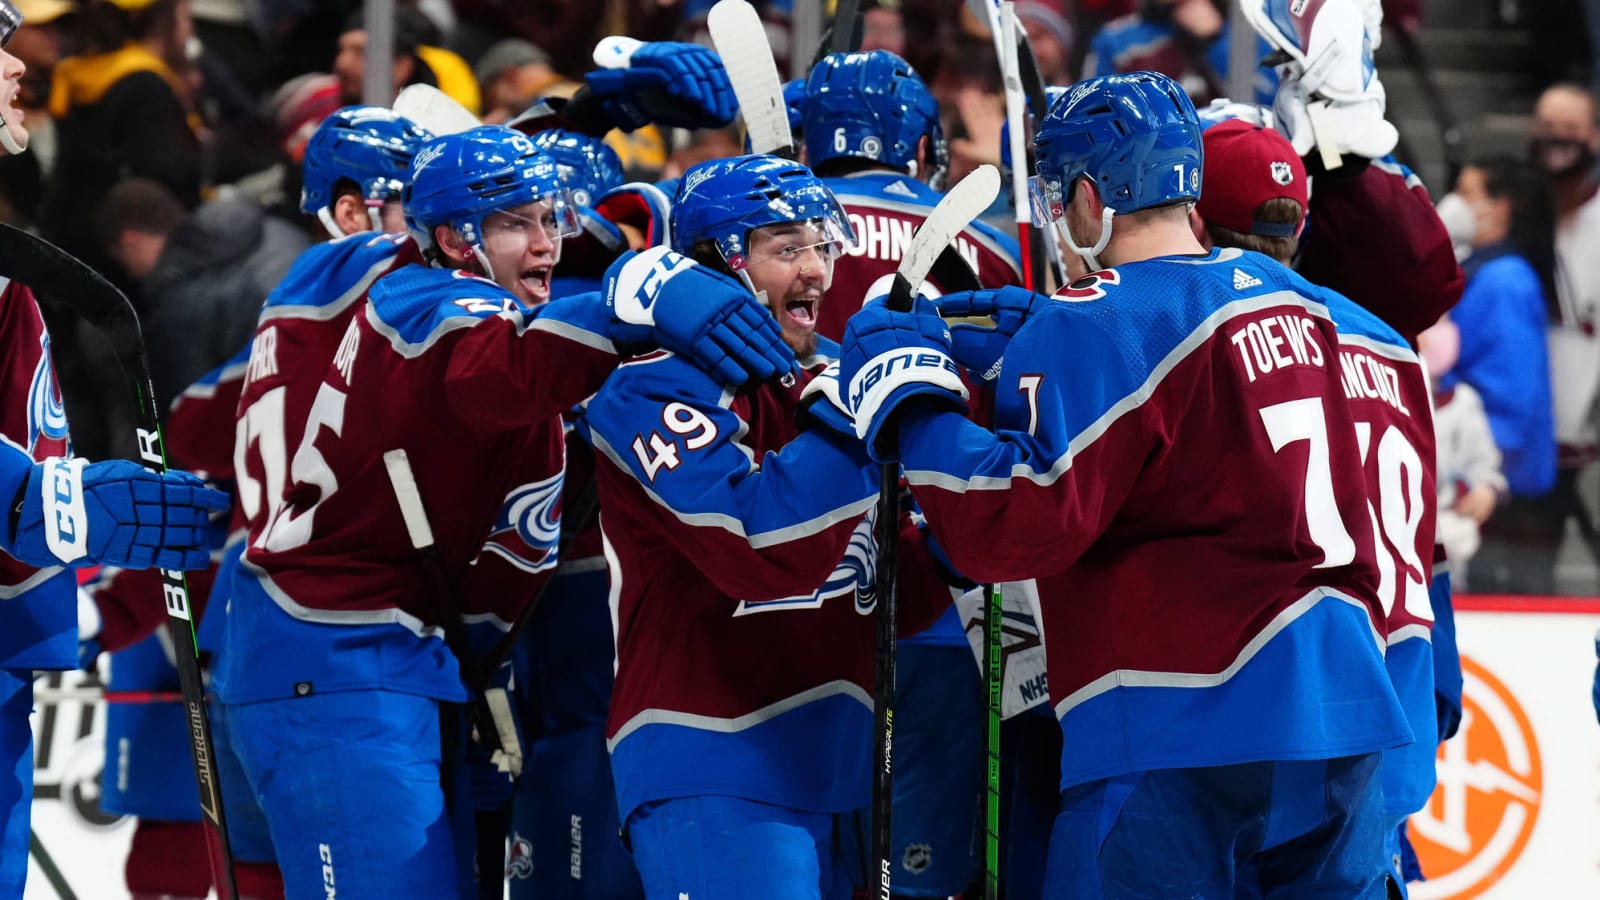 Power rankings: Avs are NHL’s top team coming out of break